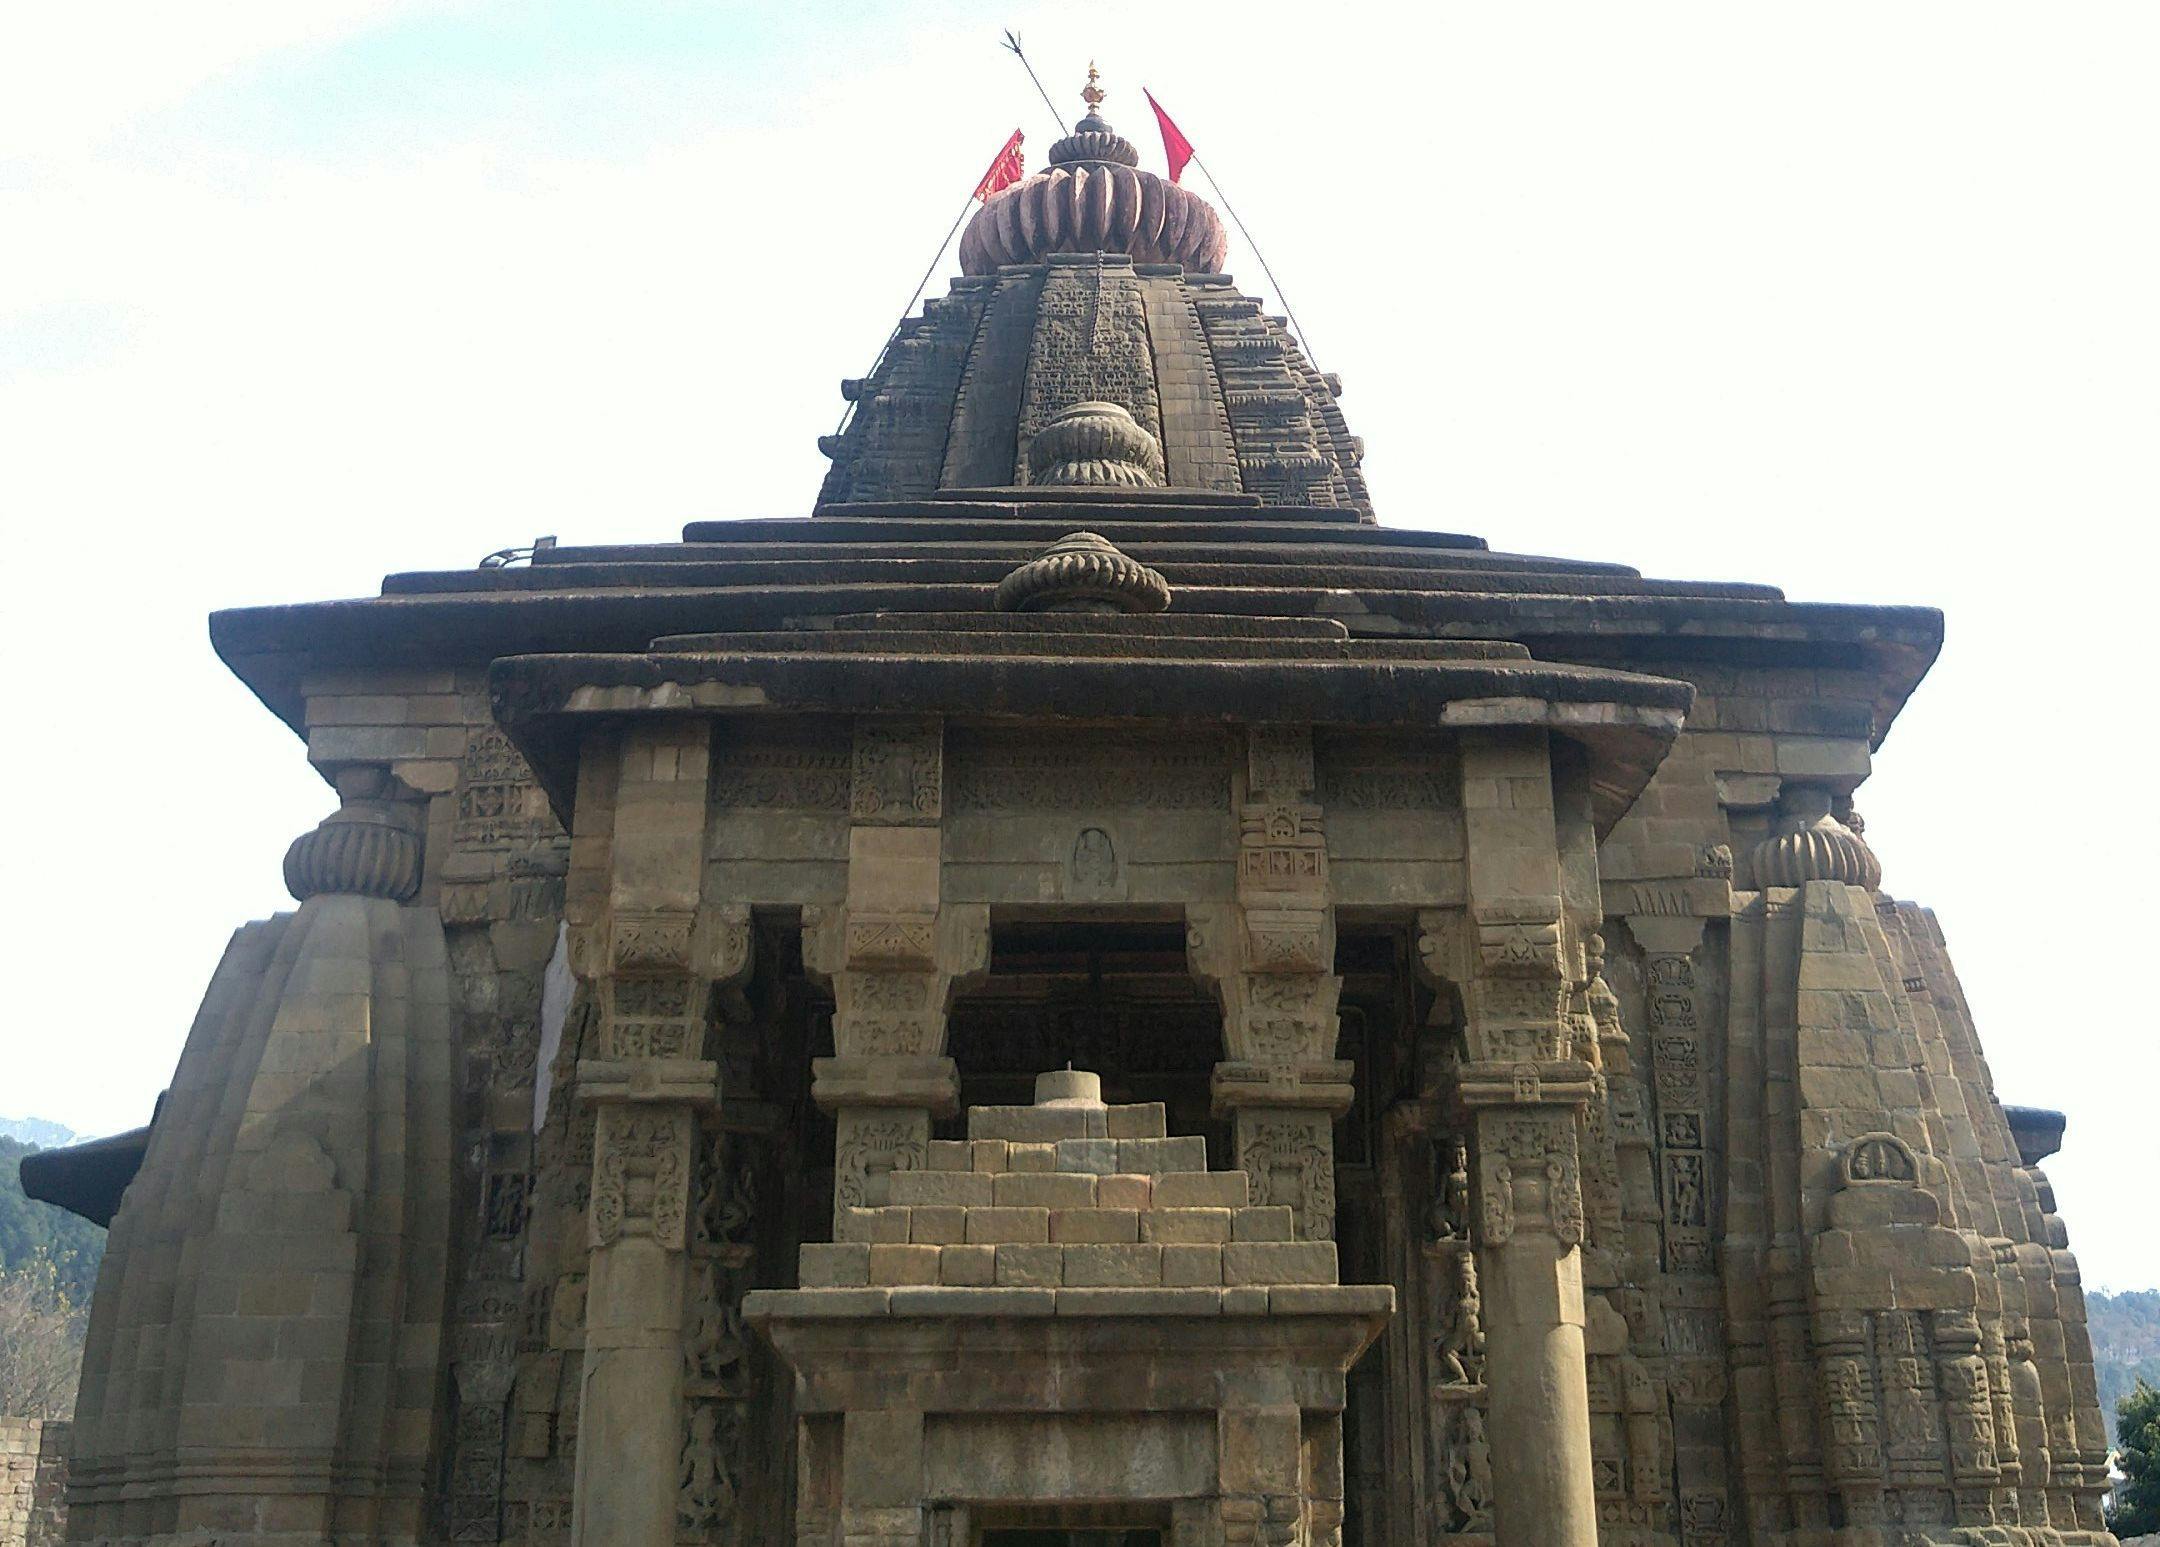 The front of the temple